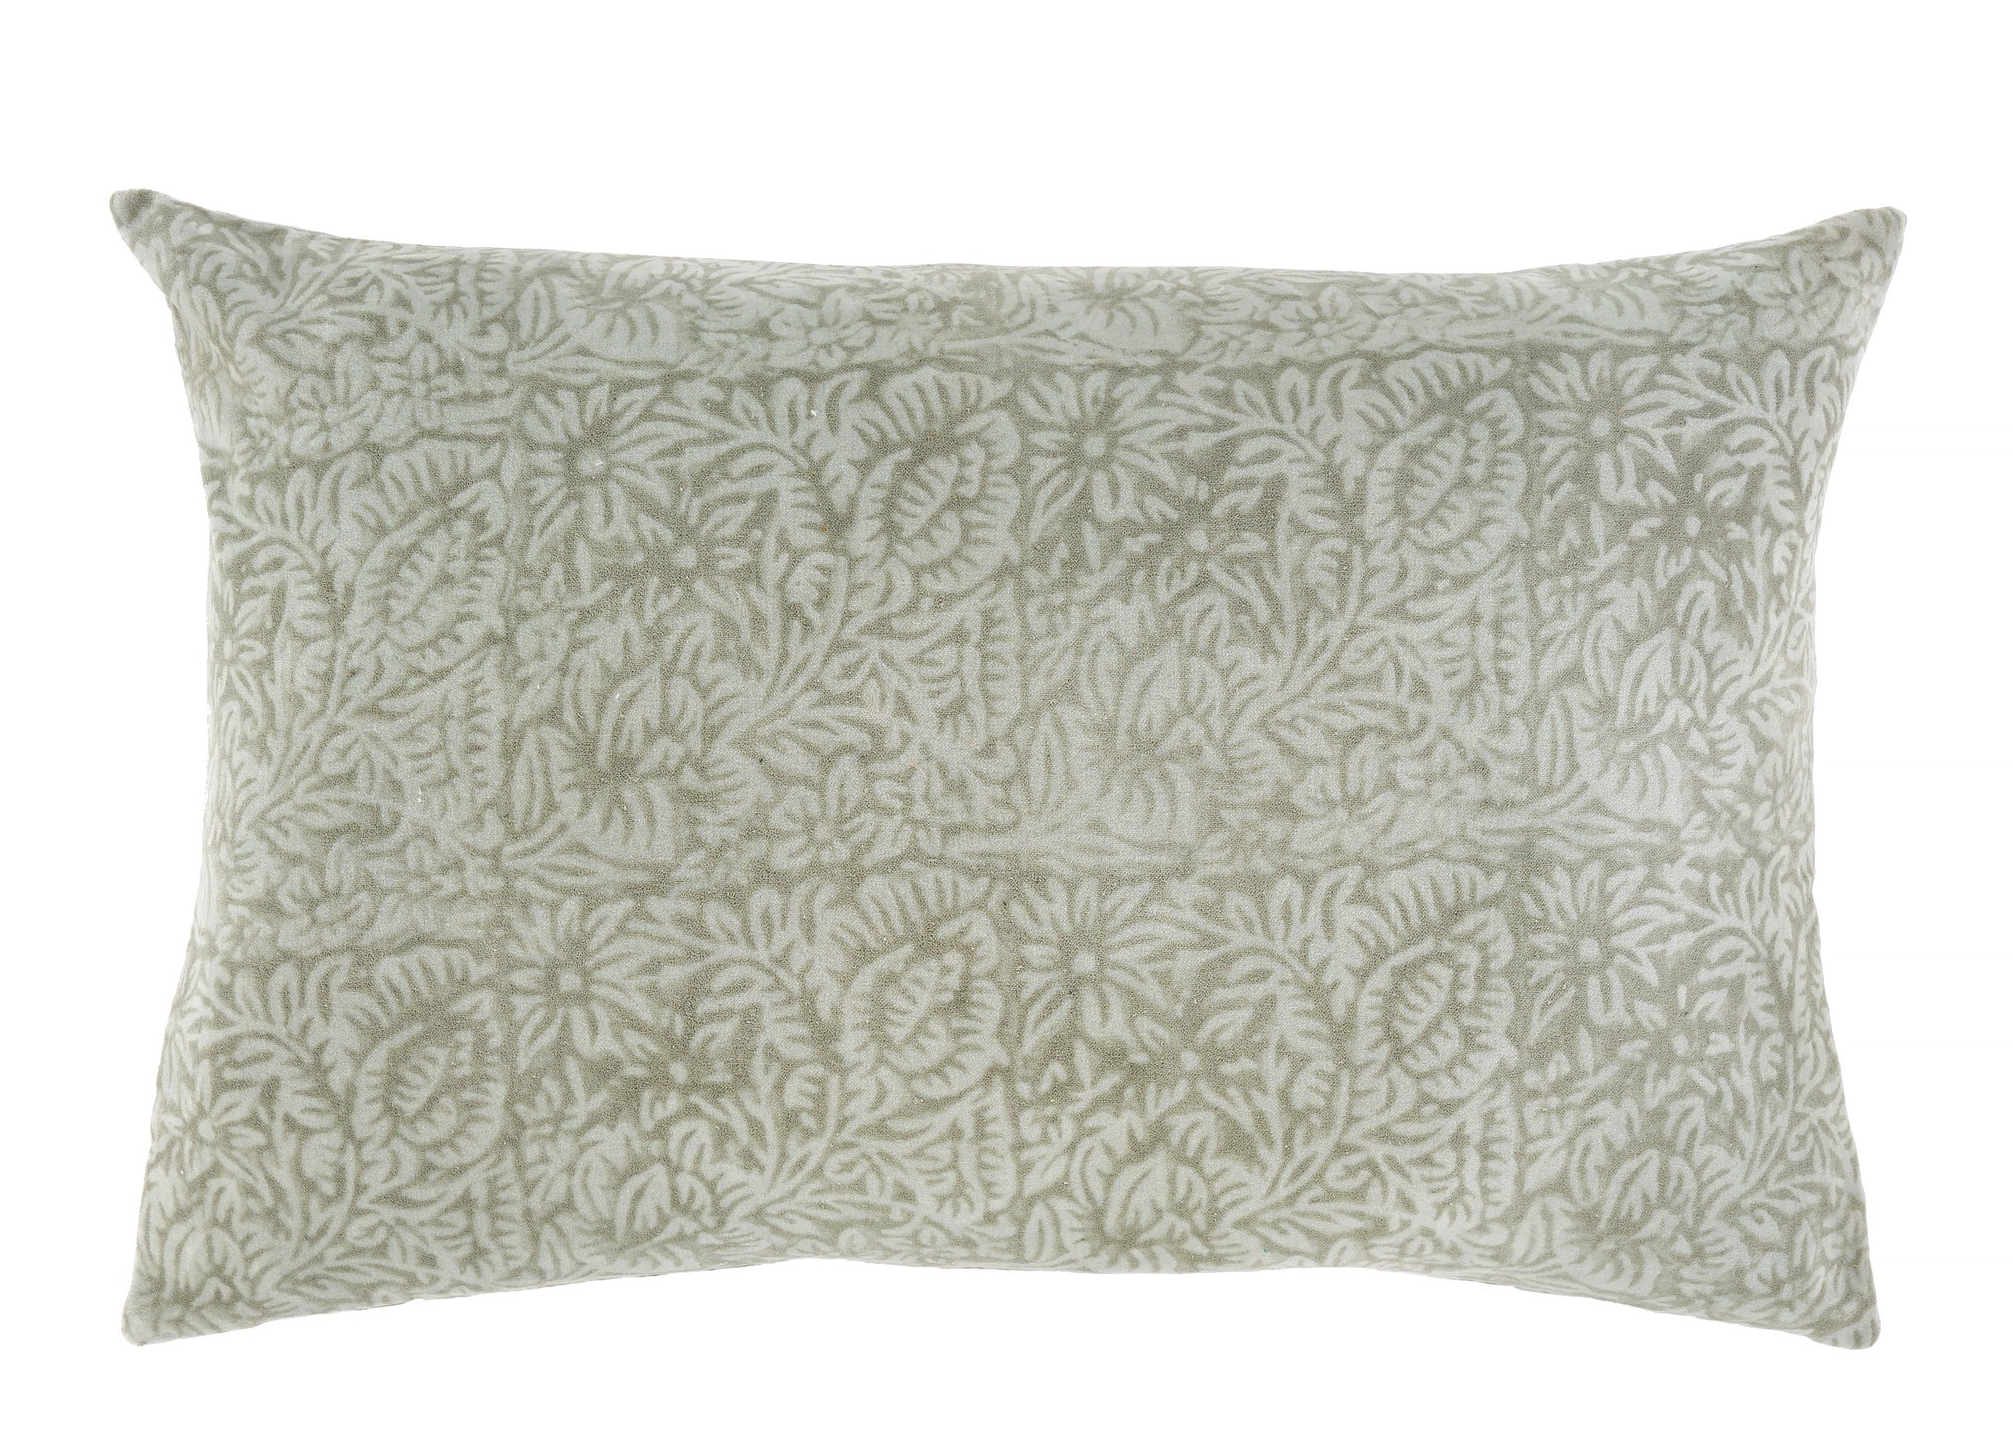 16&quot; x 24&quot;
Plush cotton stone washed cover with removable feather insert.  Machine wash cold.  Made in India
$69.99